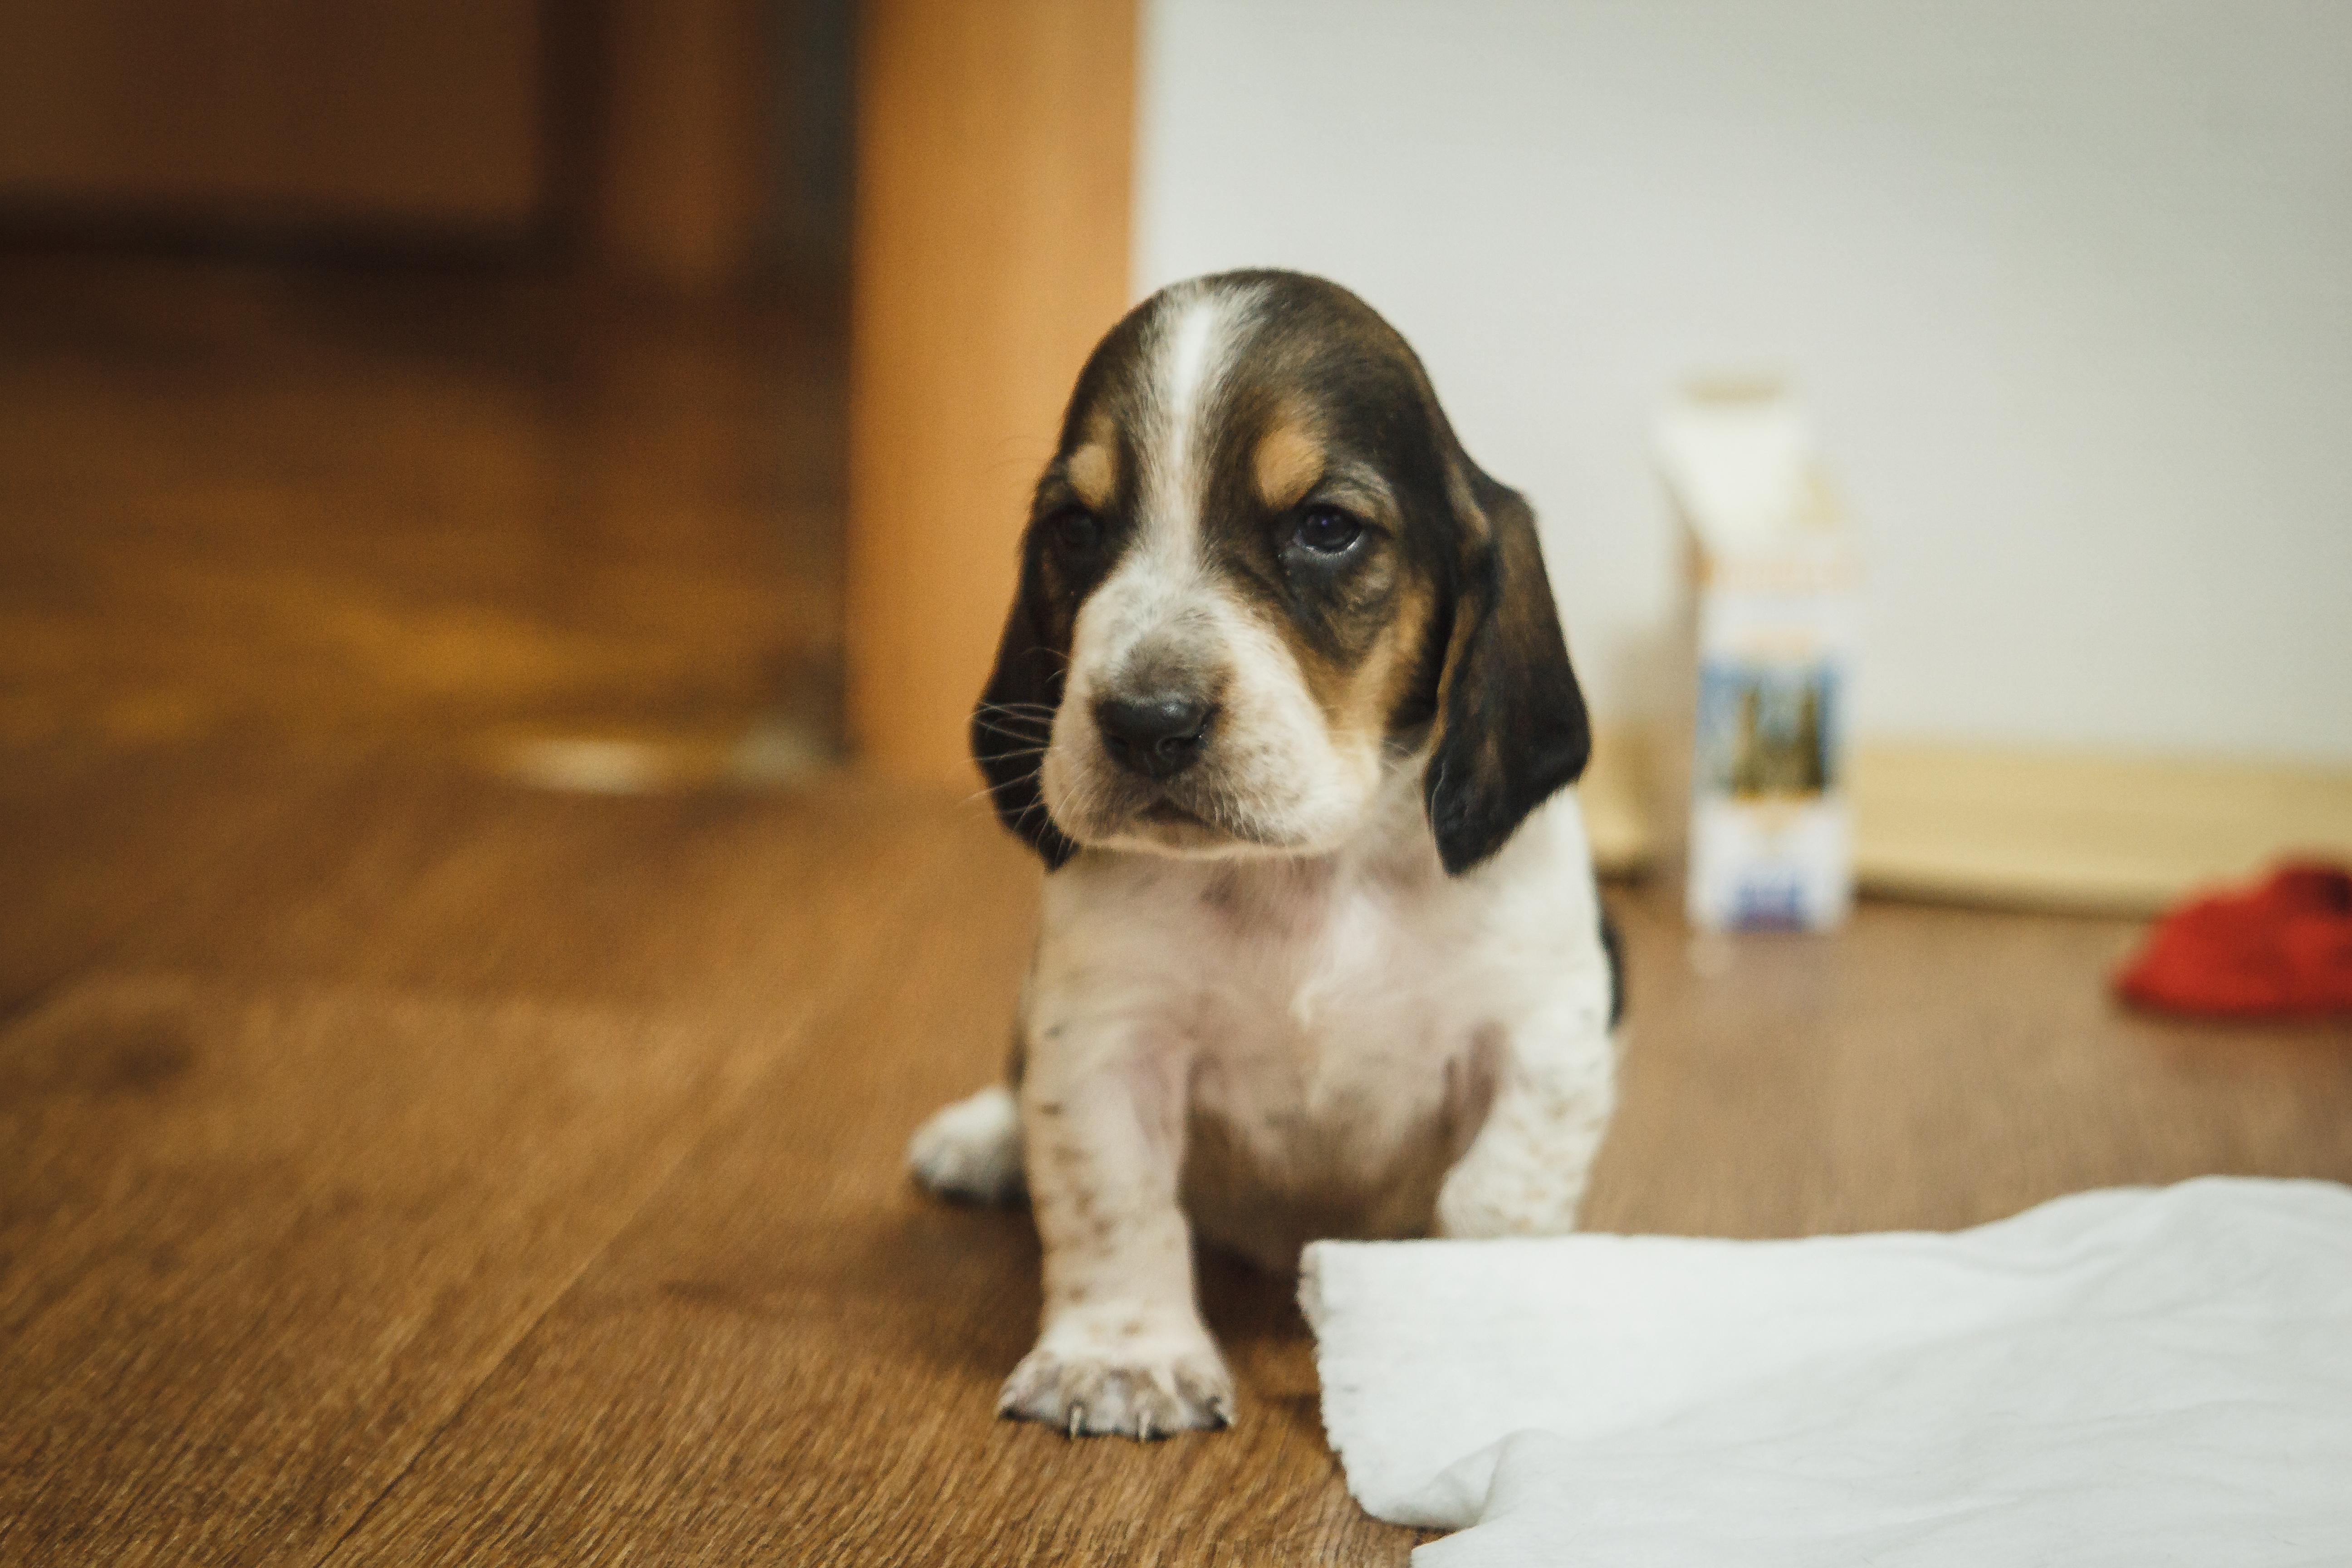 Sad basset hound puppy wallpapers and images - wallpapers ...